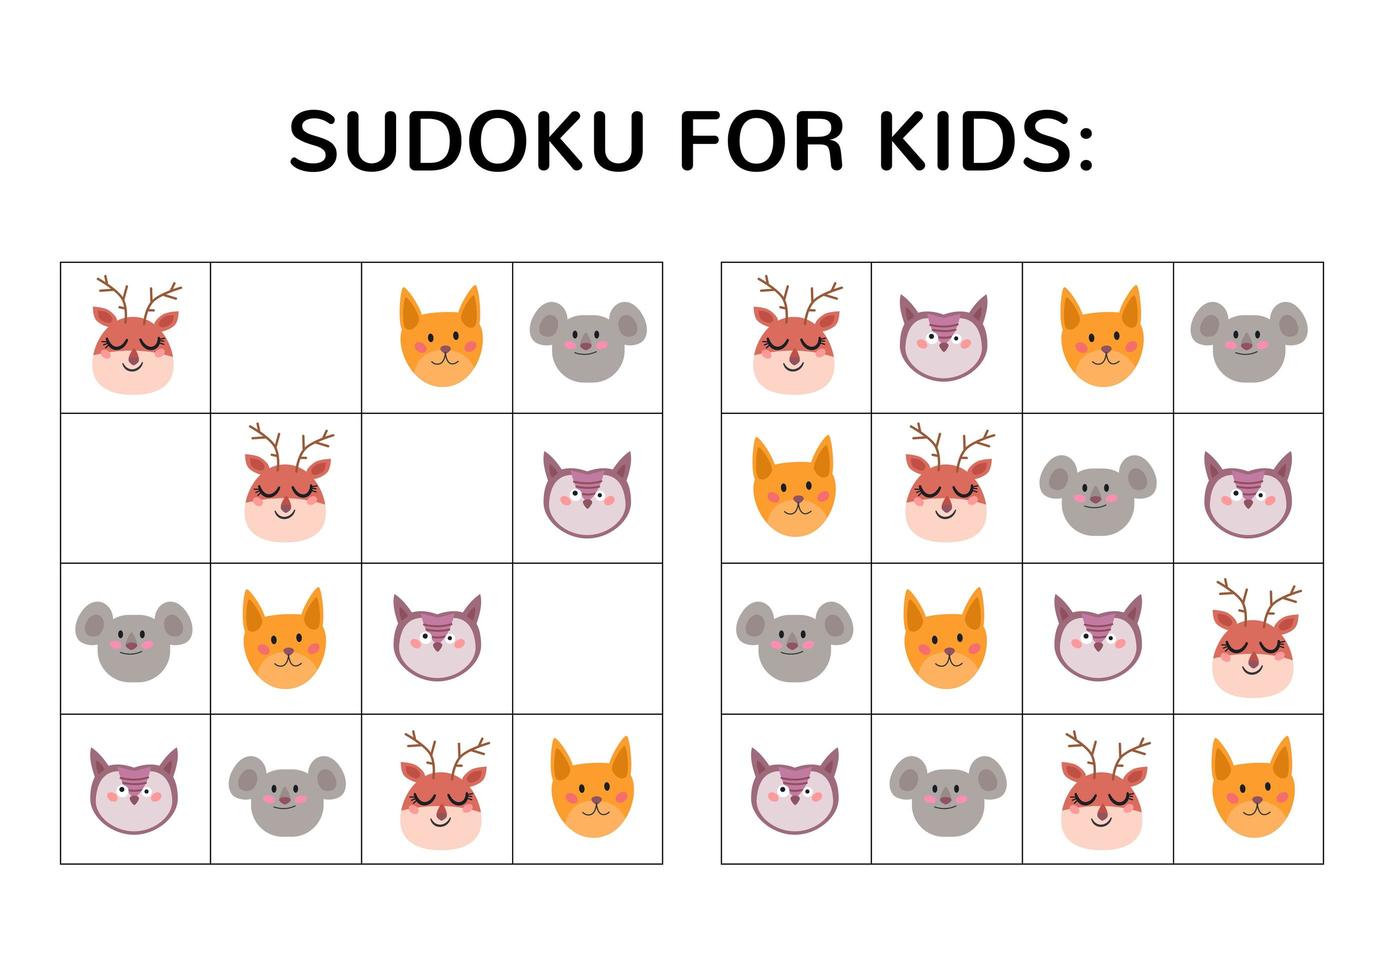 Sudoku game for kids with cute pictures. vector